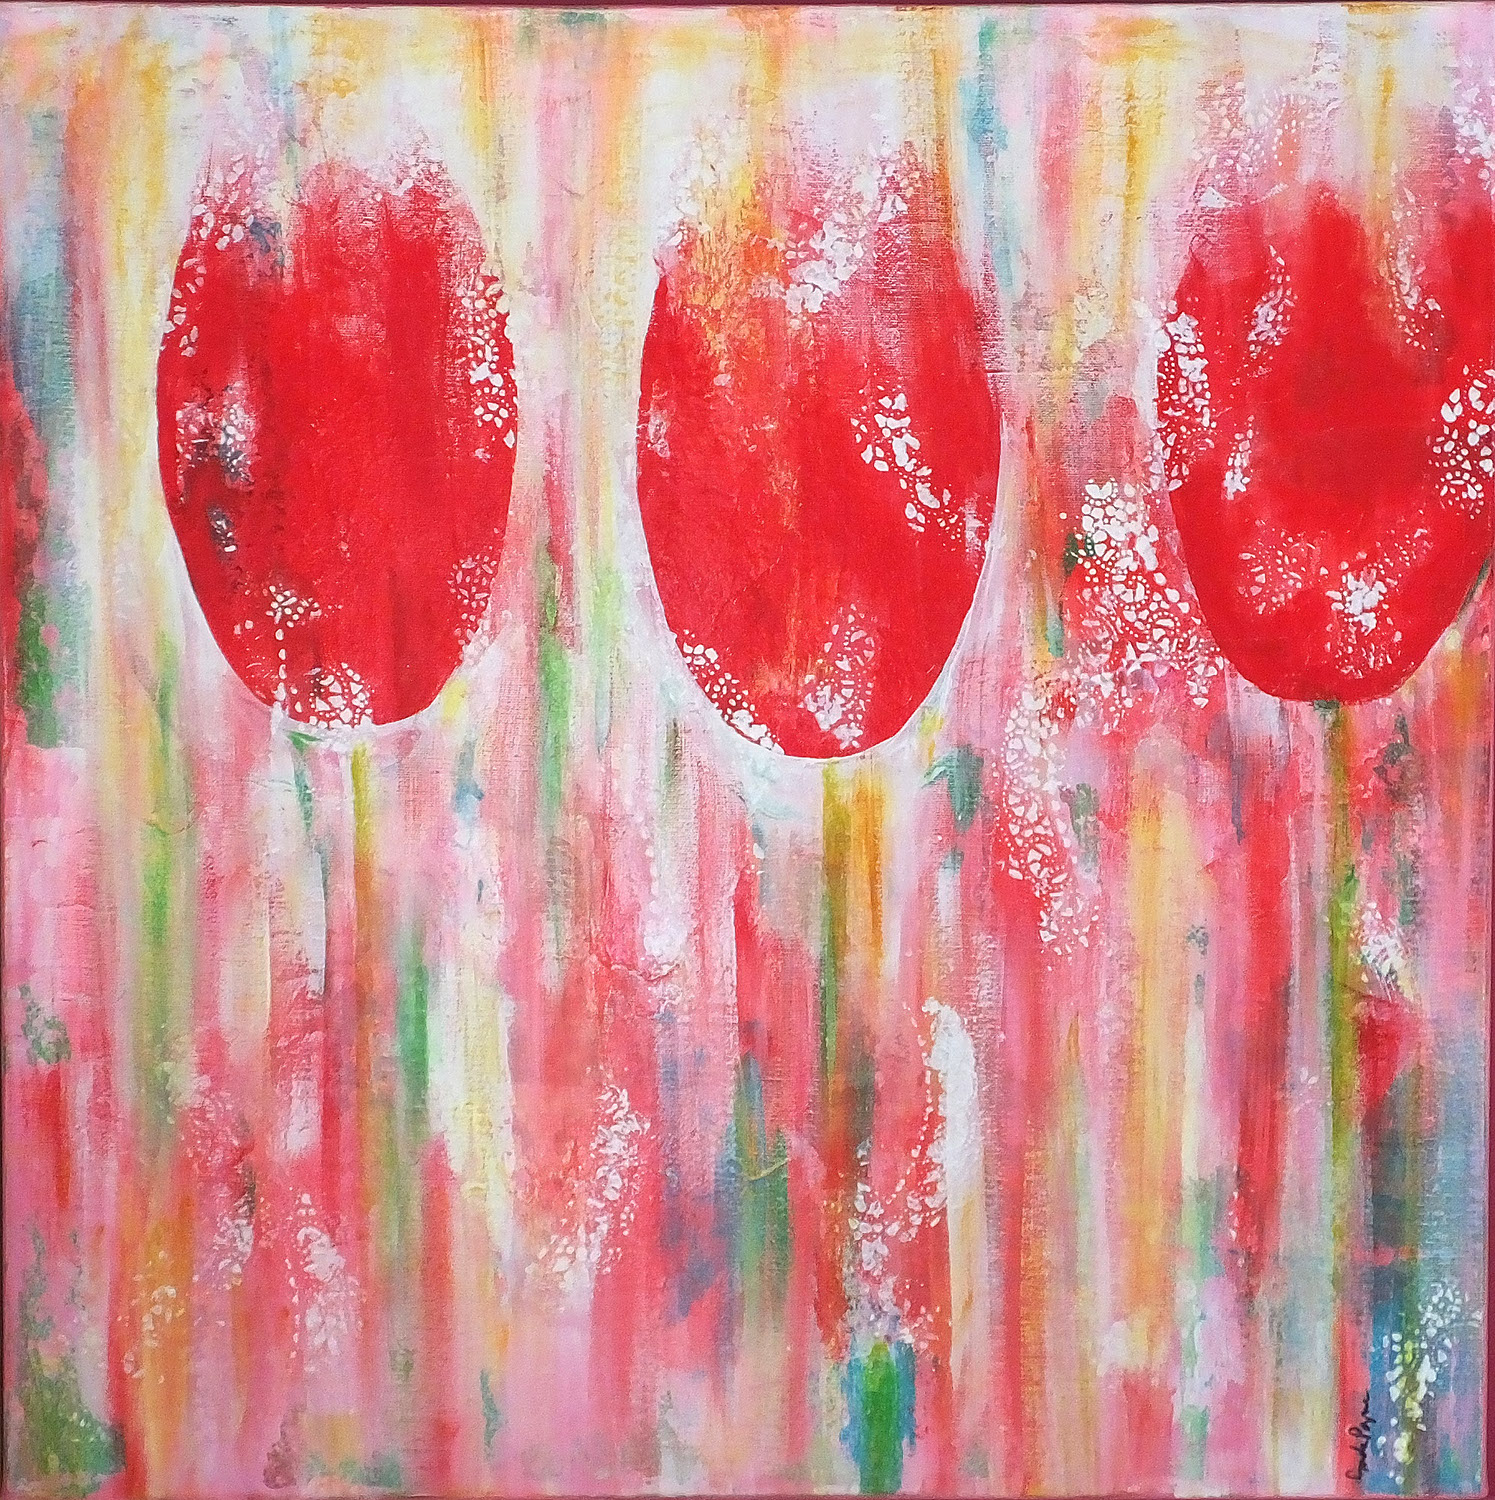 Painting: Tulips and Olde Lace by Lynda Pogue